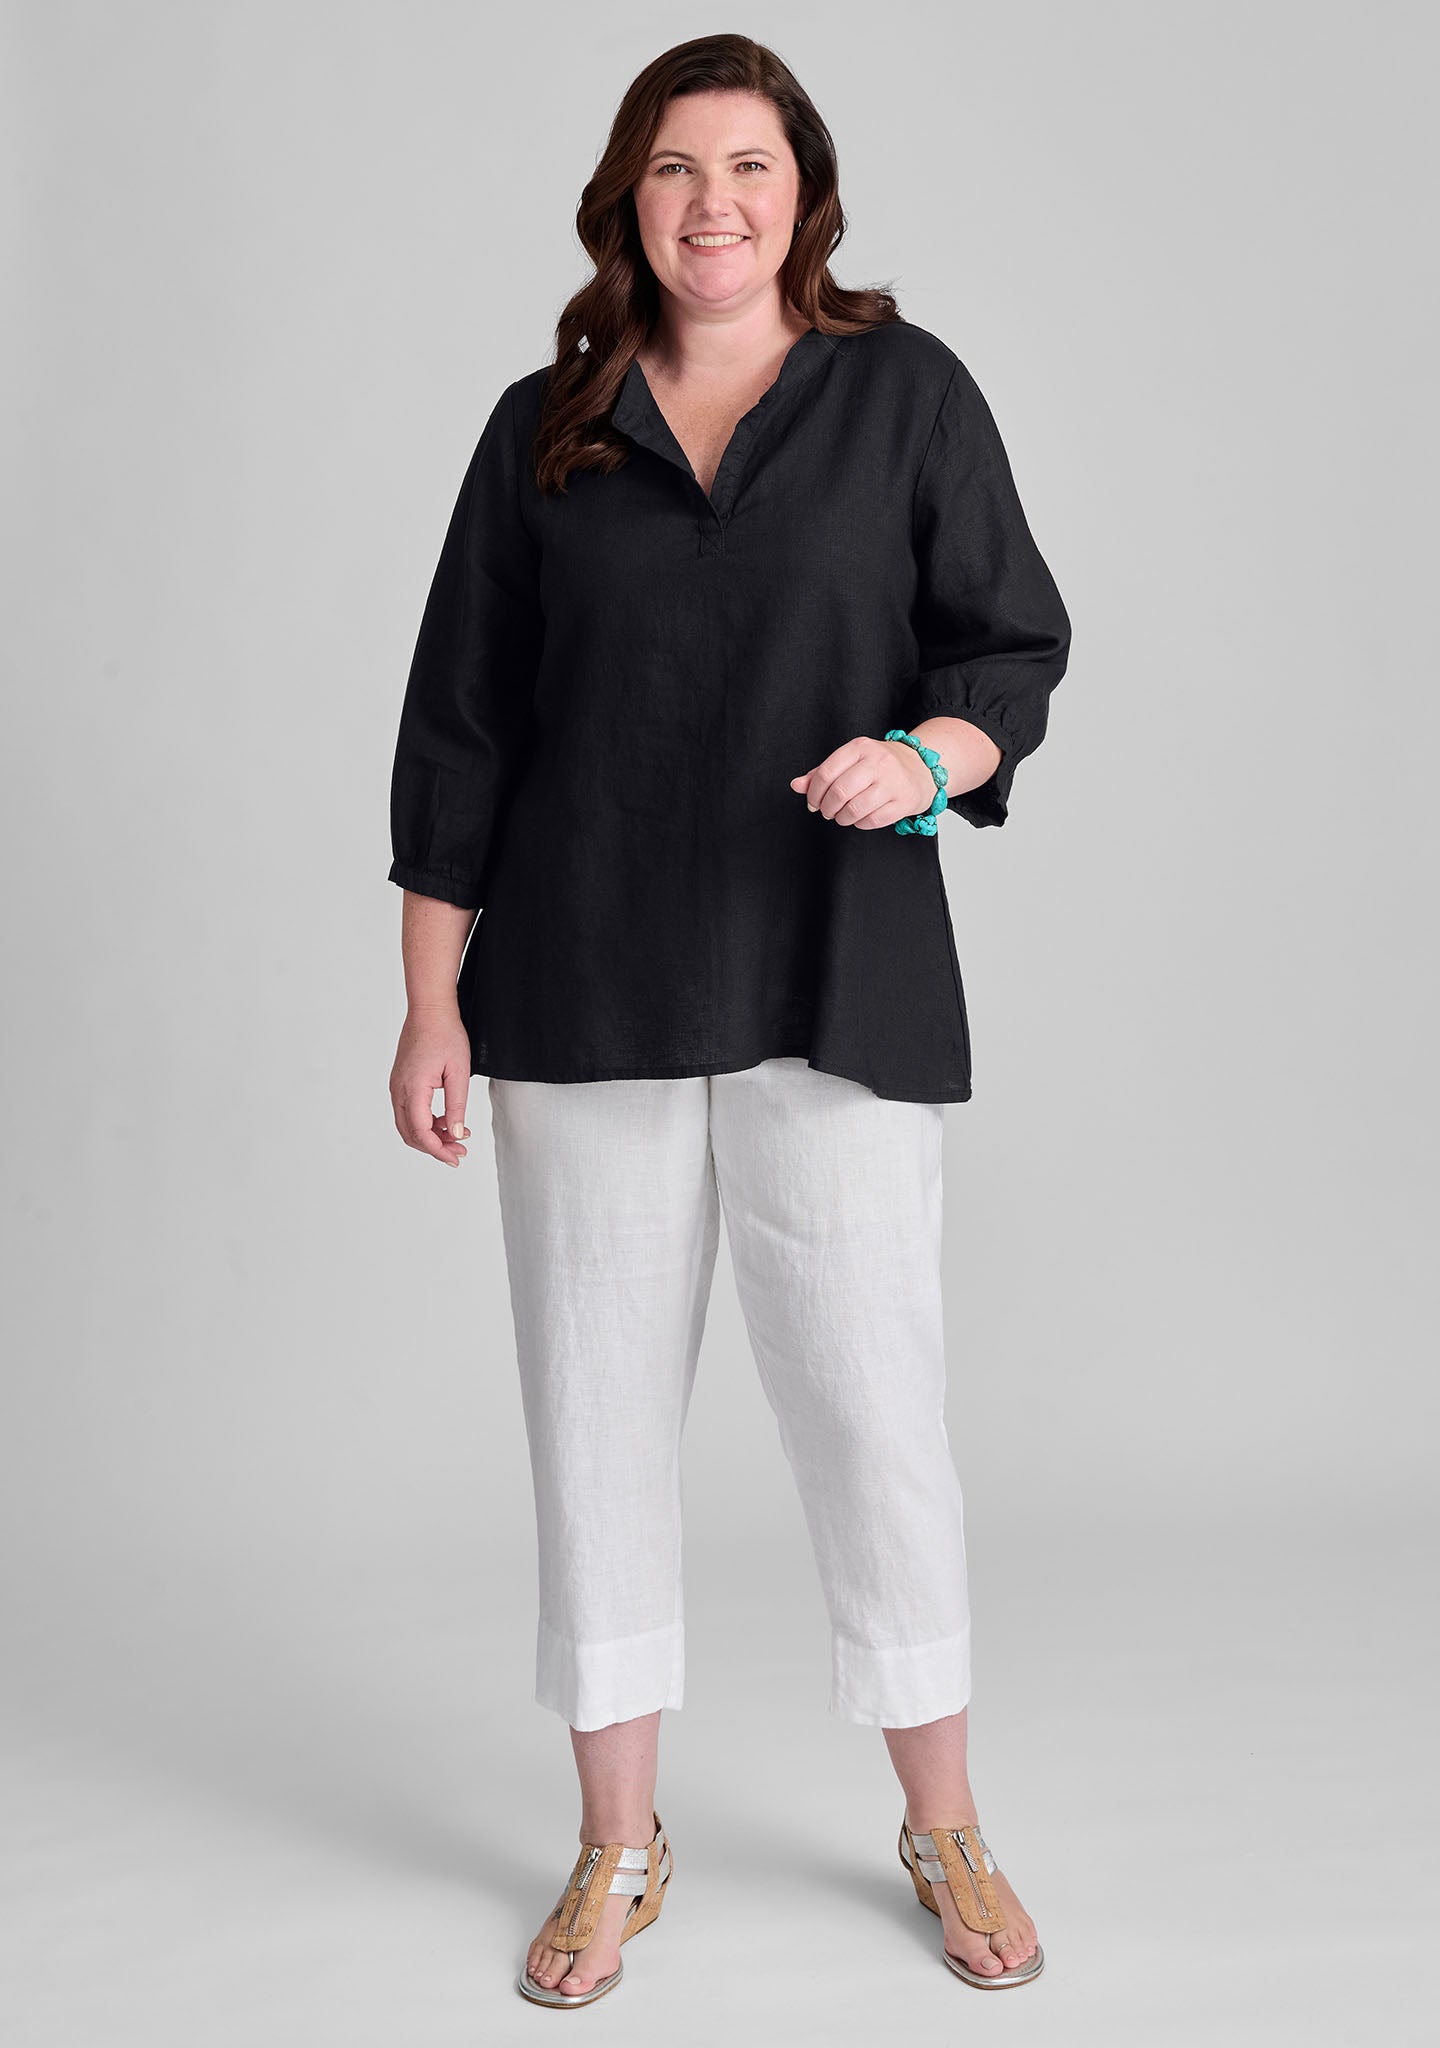 FLAX linen shirt in black with linen pants in white